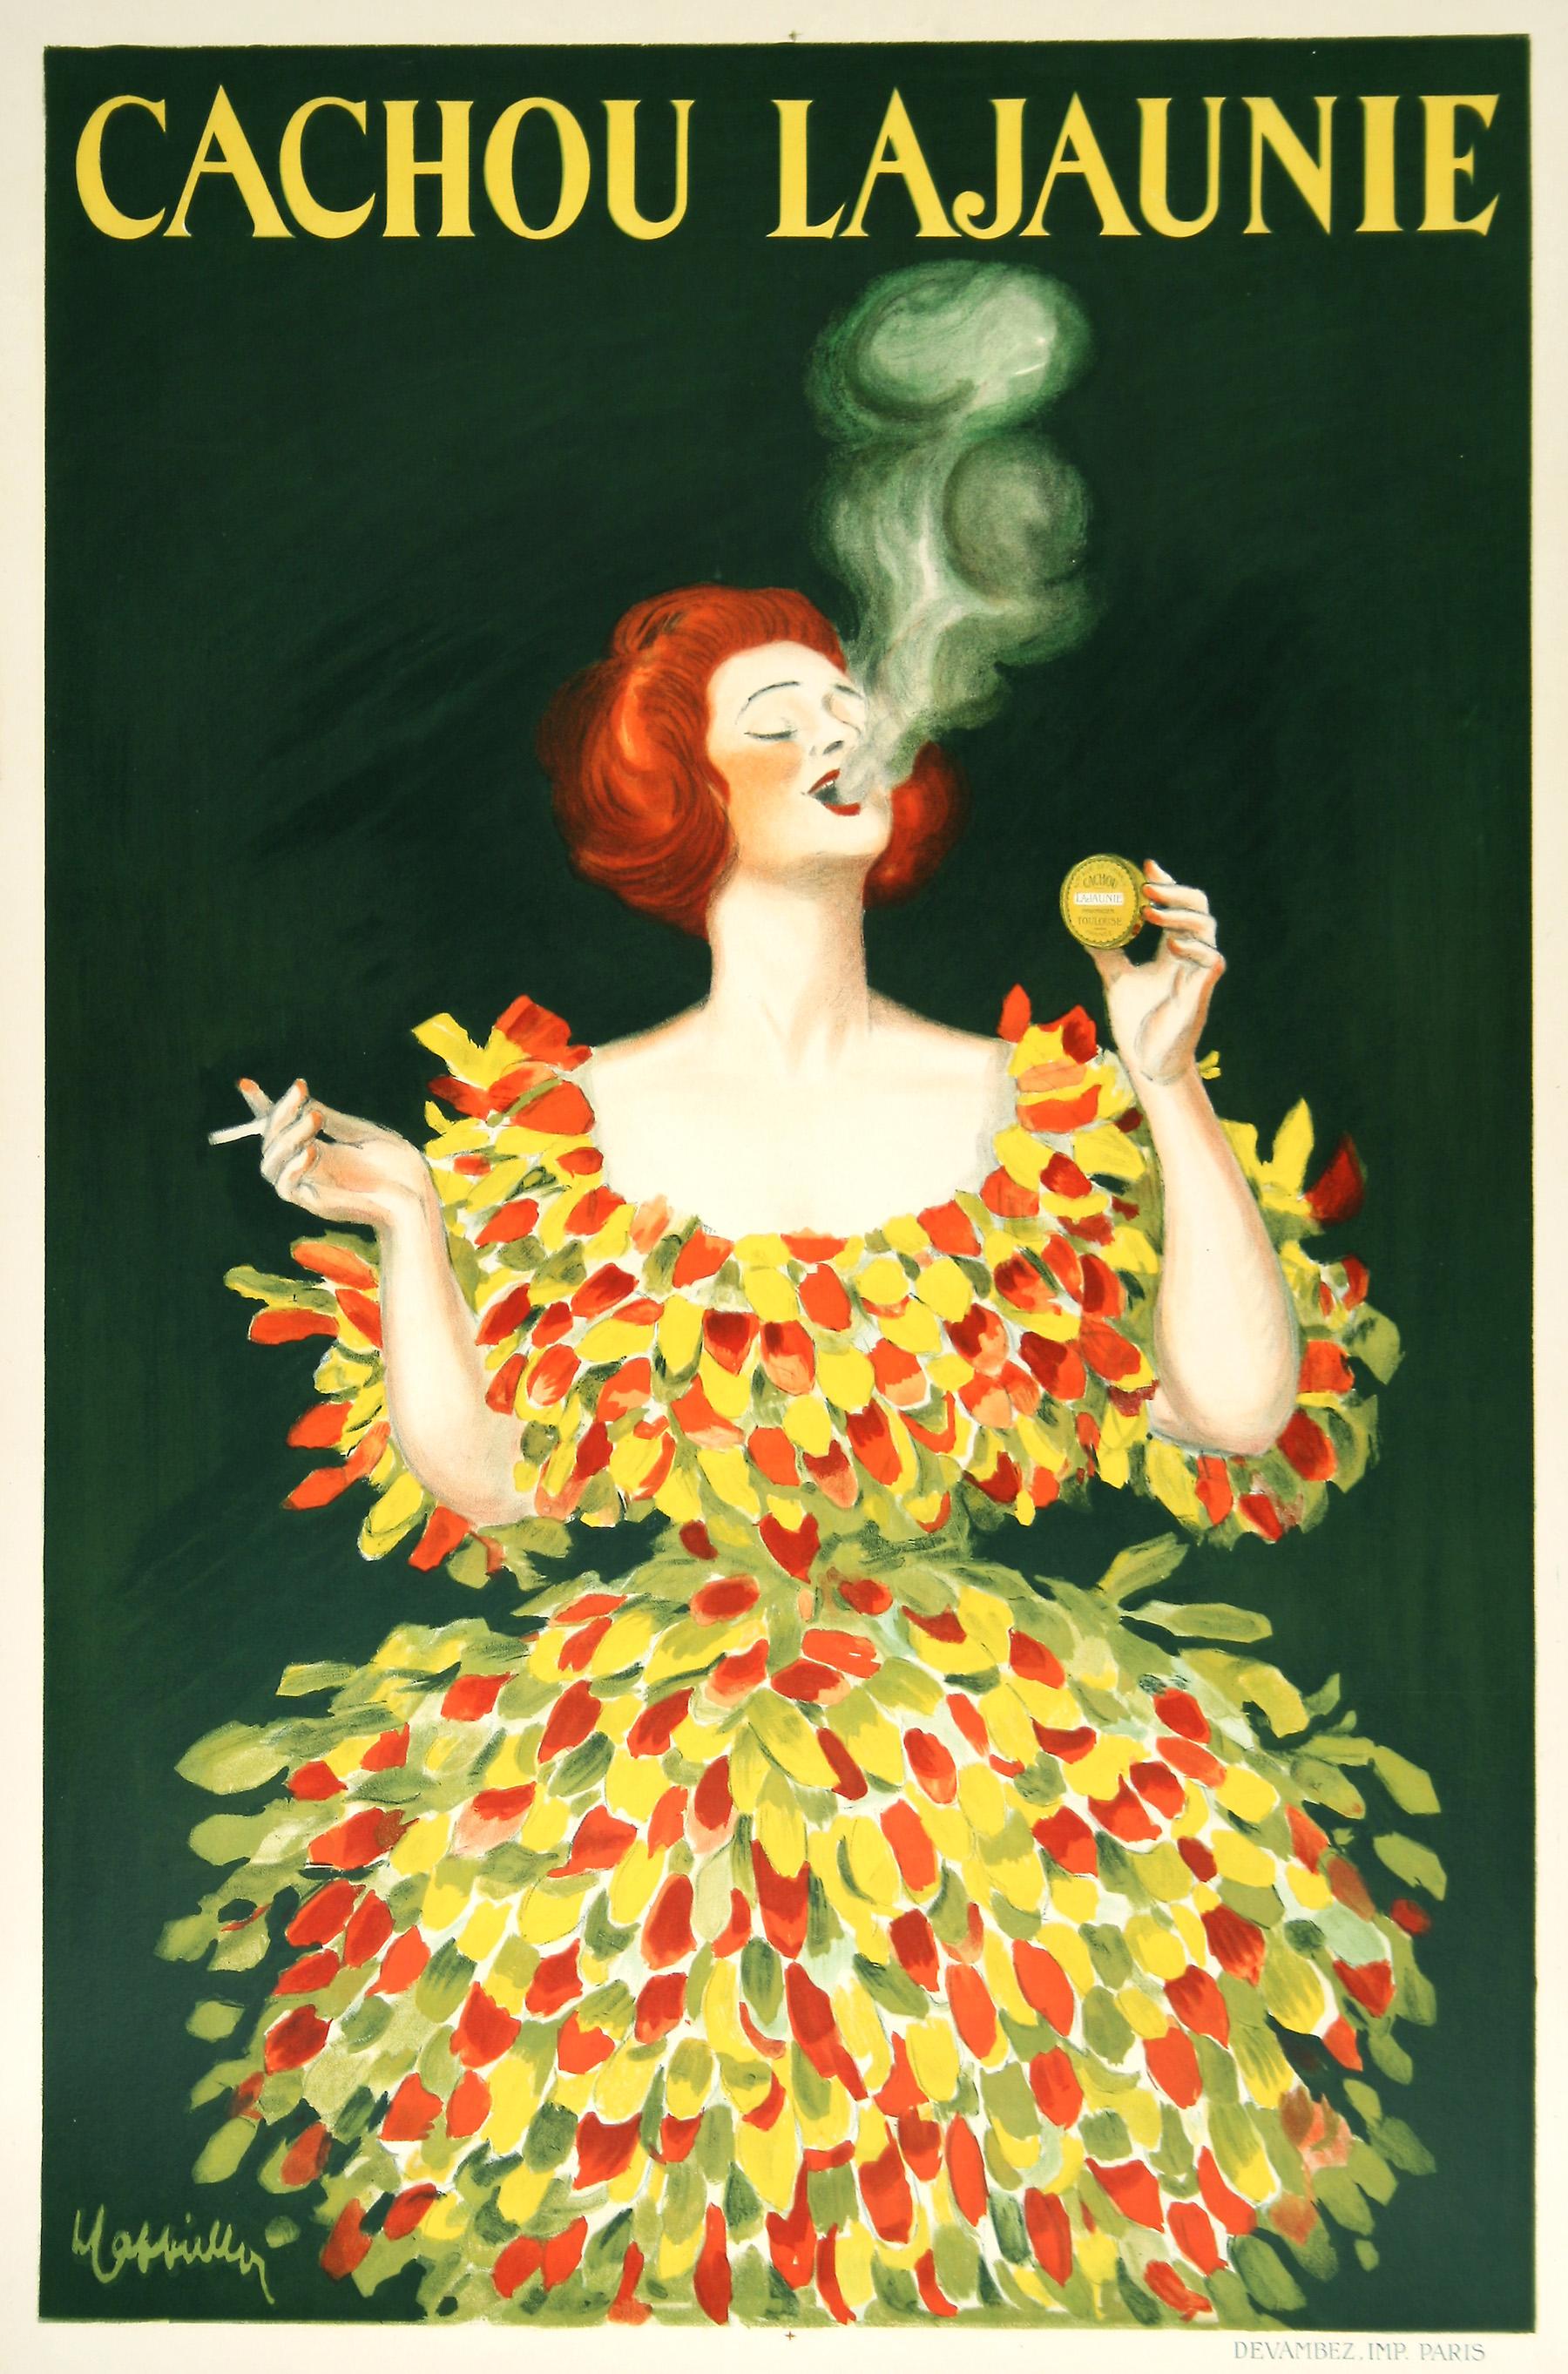 This poster for Cachou Lajaunie was designed by famous poster artist Leonetto Cappiello. This image features a woman with red hair calmly exhaling smoke from her cigarette. Set against a deep green background, the floral delicacy and color of her